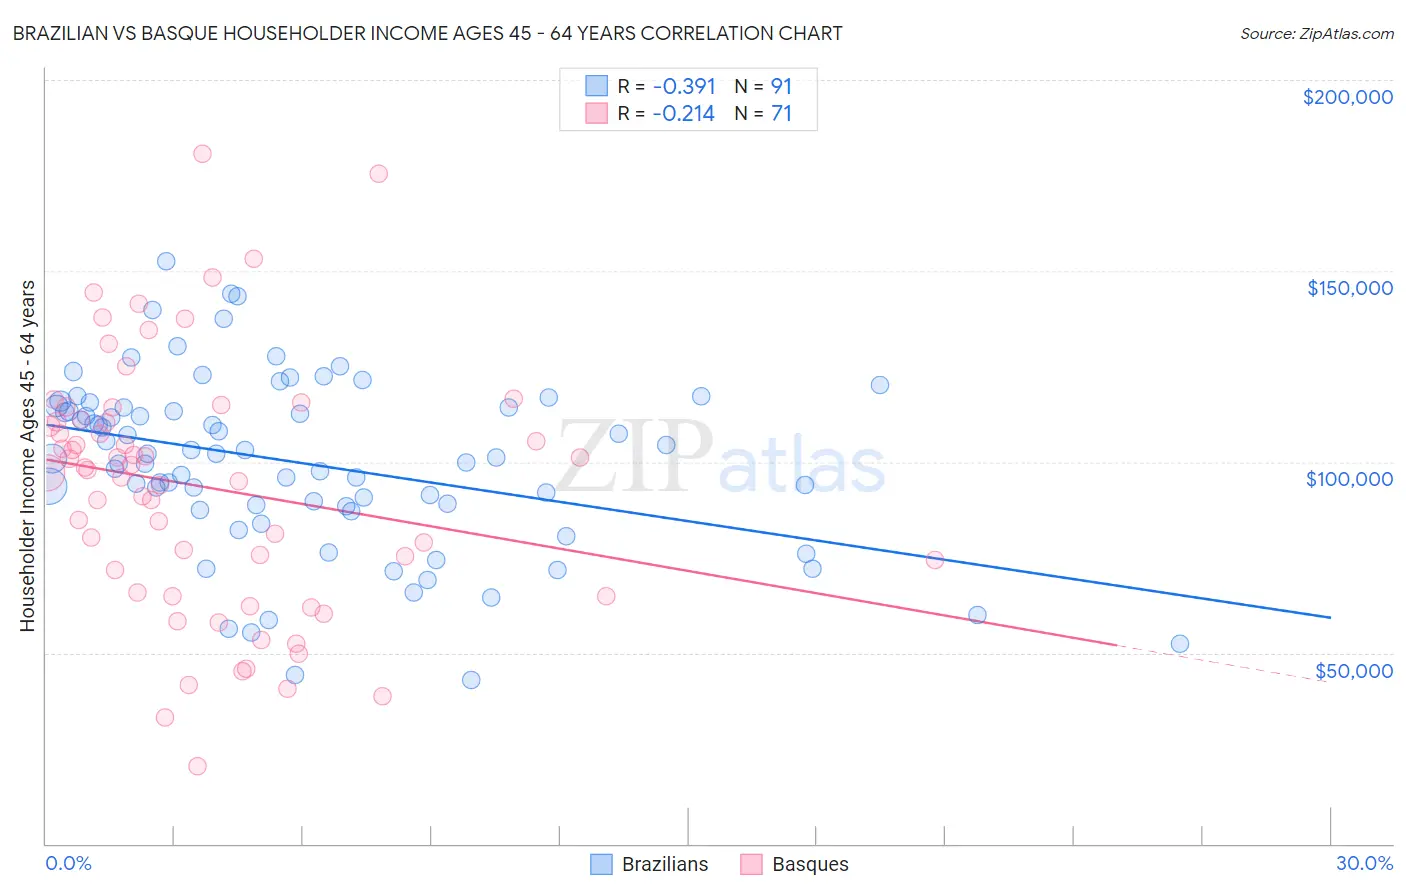 Brazilian vs Basque Householder Income Ages 45 - 64 years